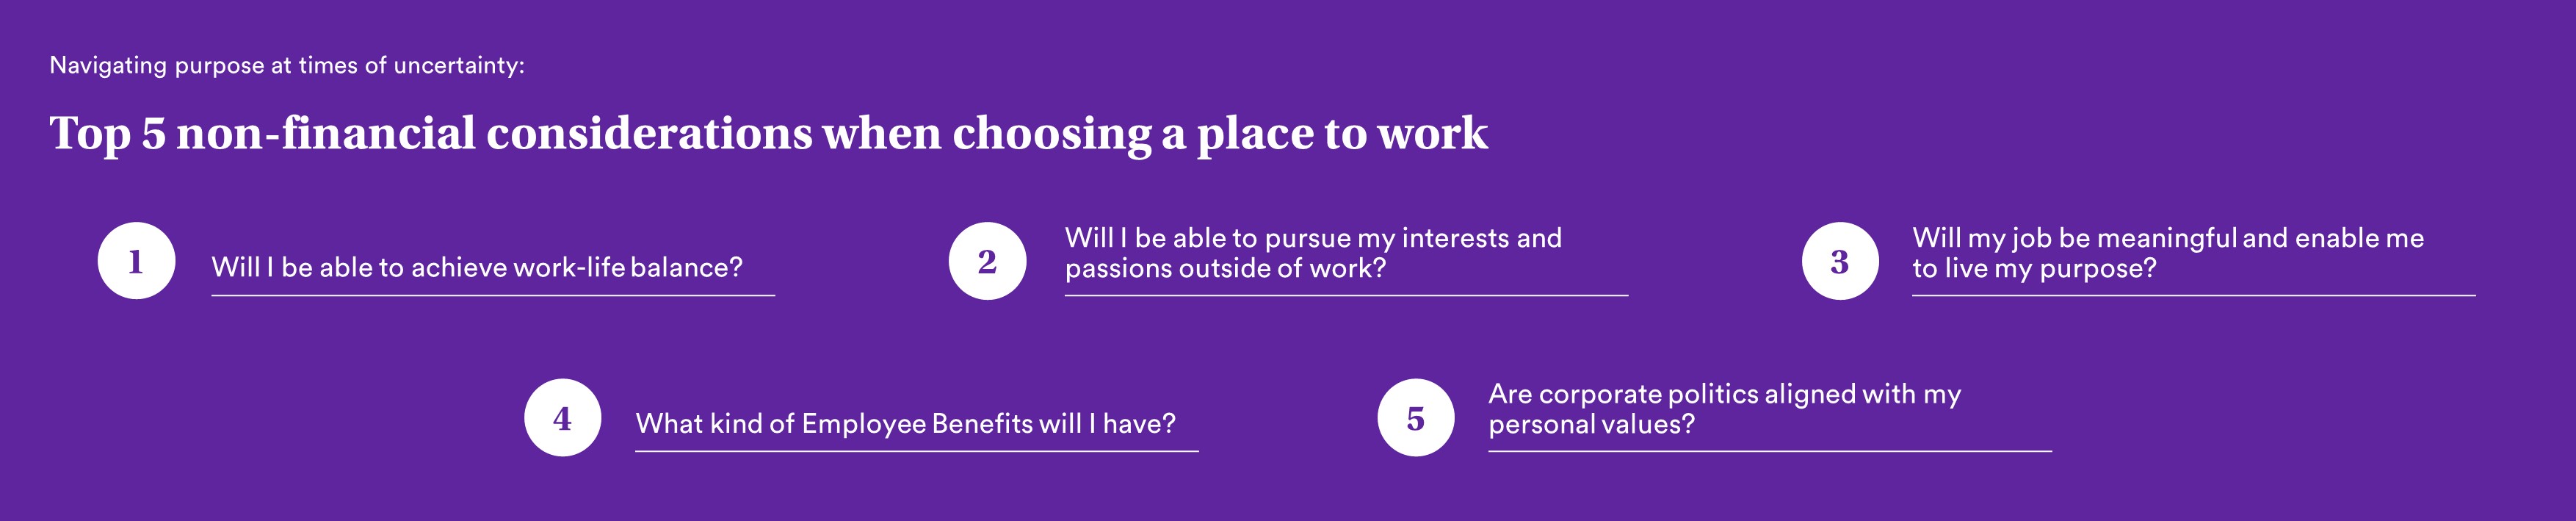 Top 5 non-financial considerations when choosing a workplace. 1. Will I be able to achieve work-life balance? 2. Will I be able to pursue my interests and passions outside of work? 3. Will my job be meaningful and enable me to live my purpose? 4. What kind of Employee Benefits will I have? 5. Are corporate policies aligned with my personal values?